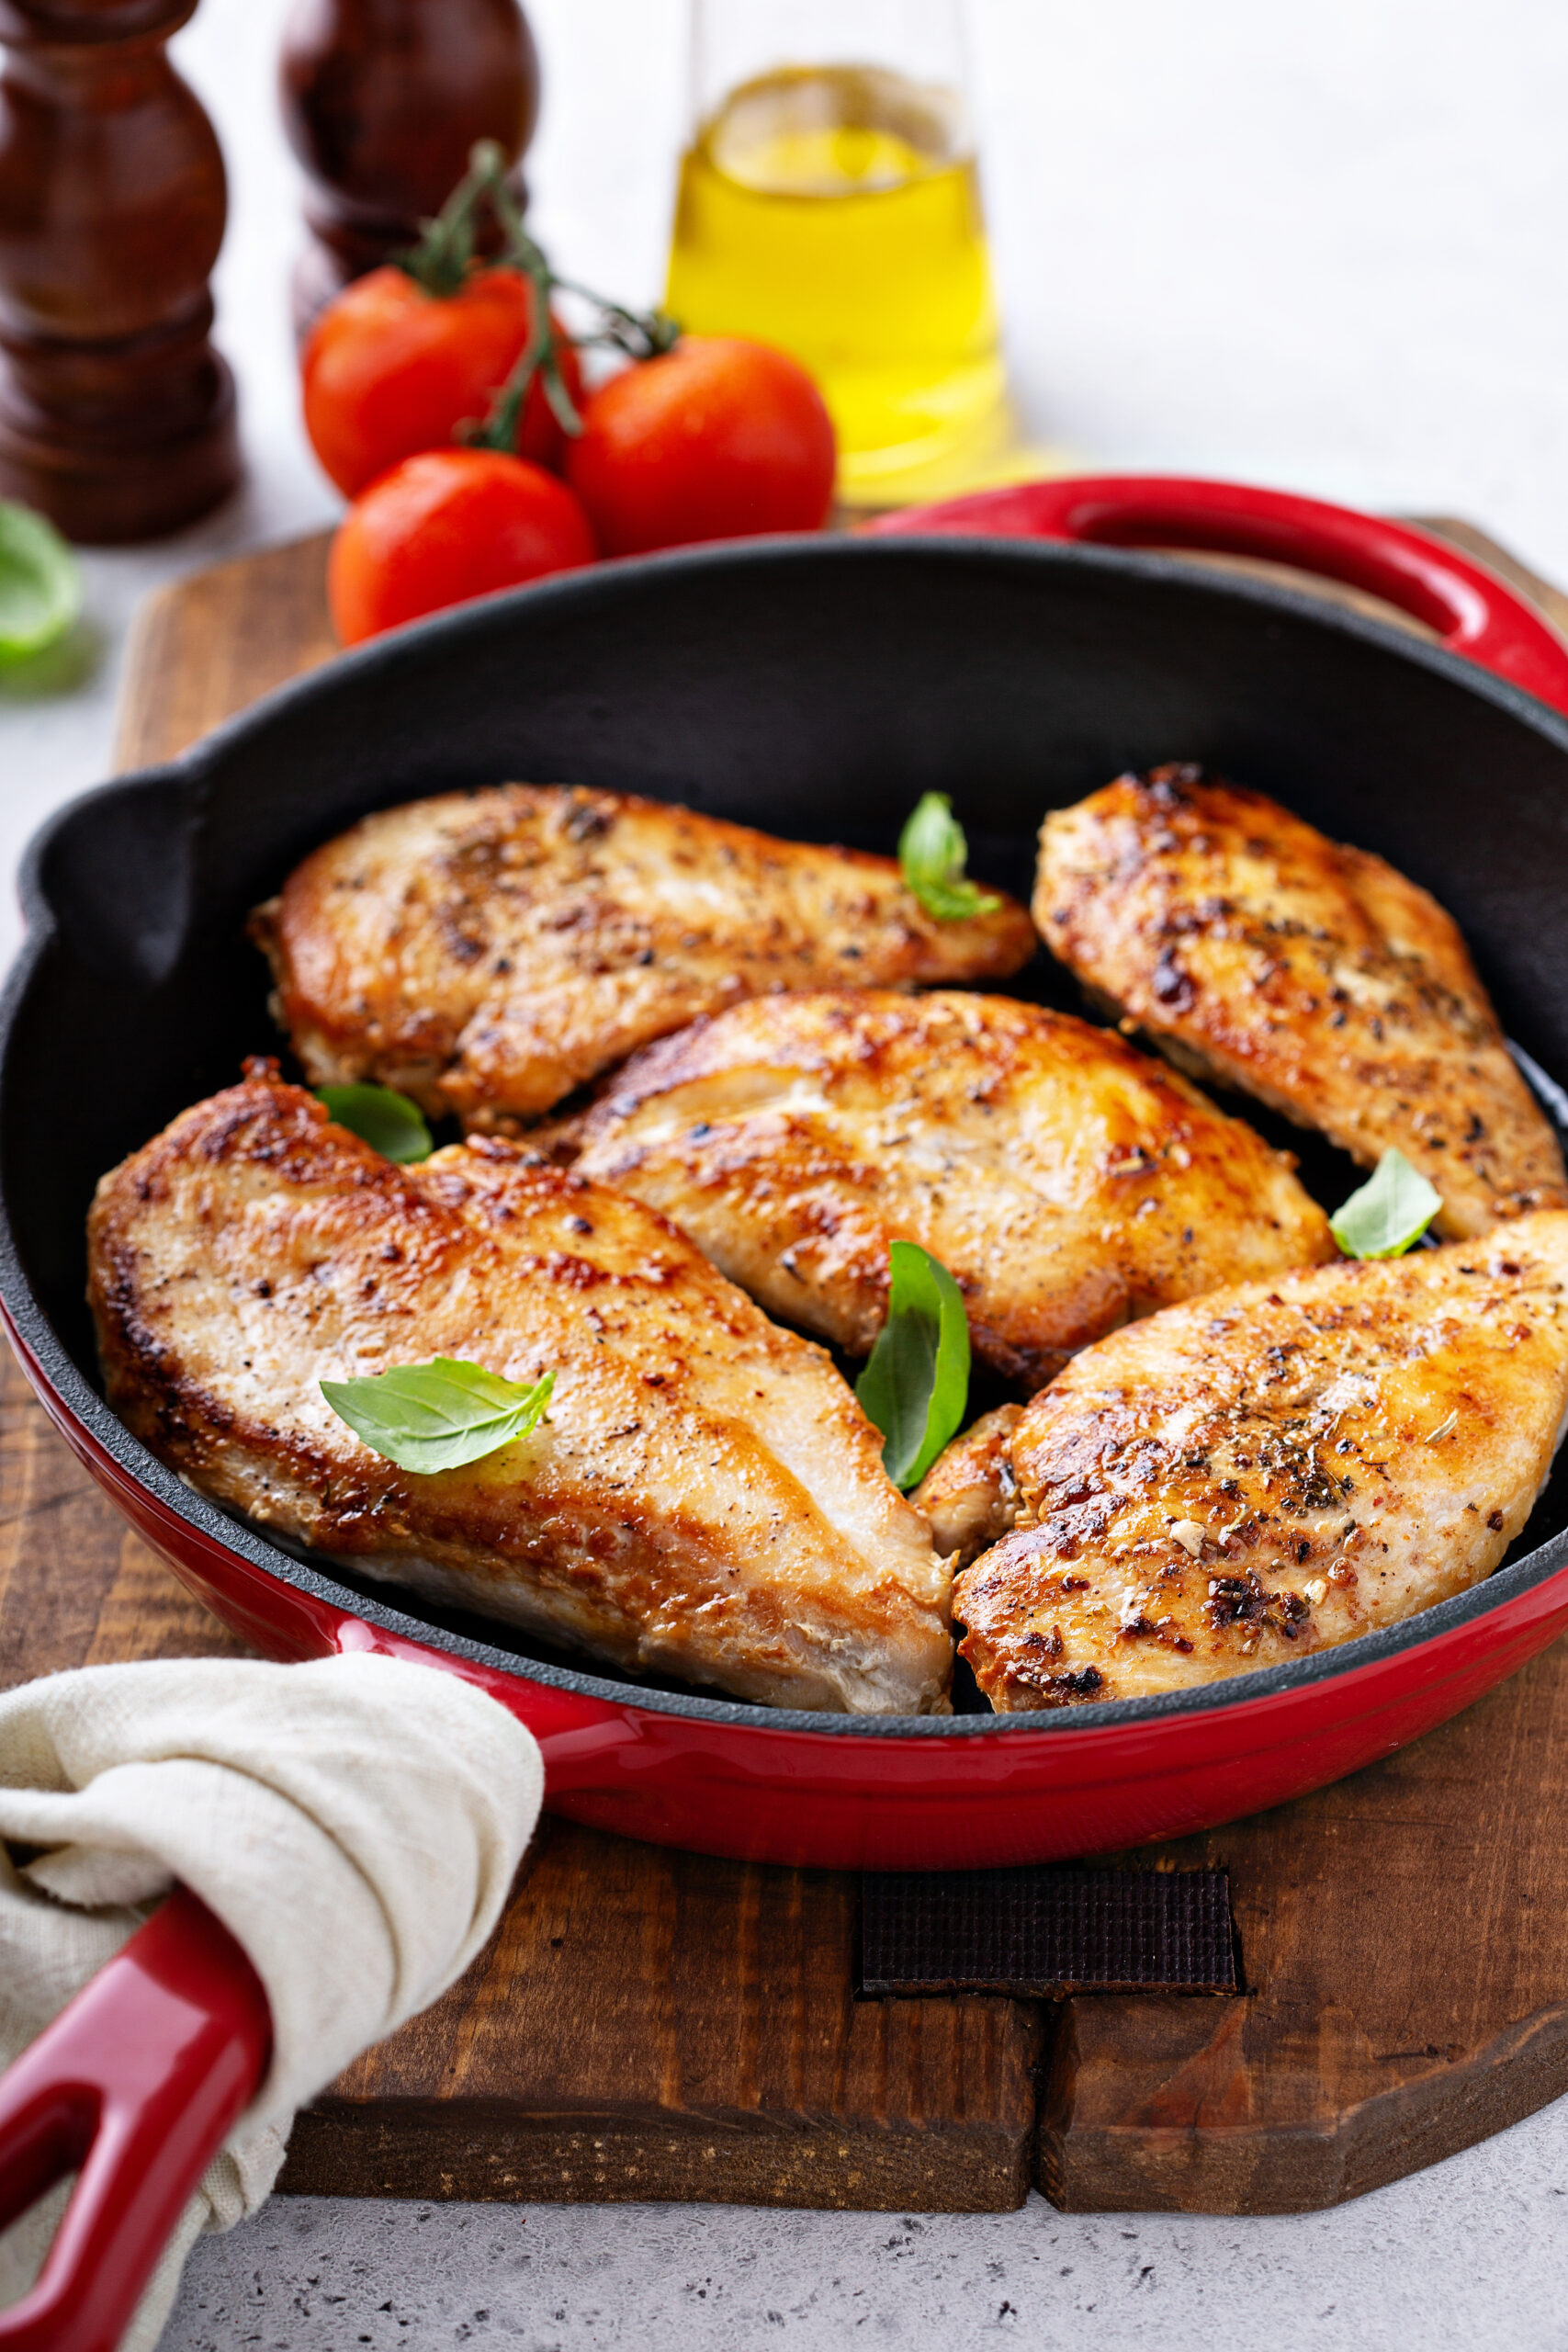 WeightWatchers Friendly Chicken Recipes (With PointsPlus and SmartPoint Values)